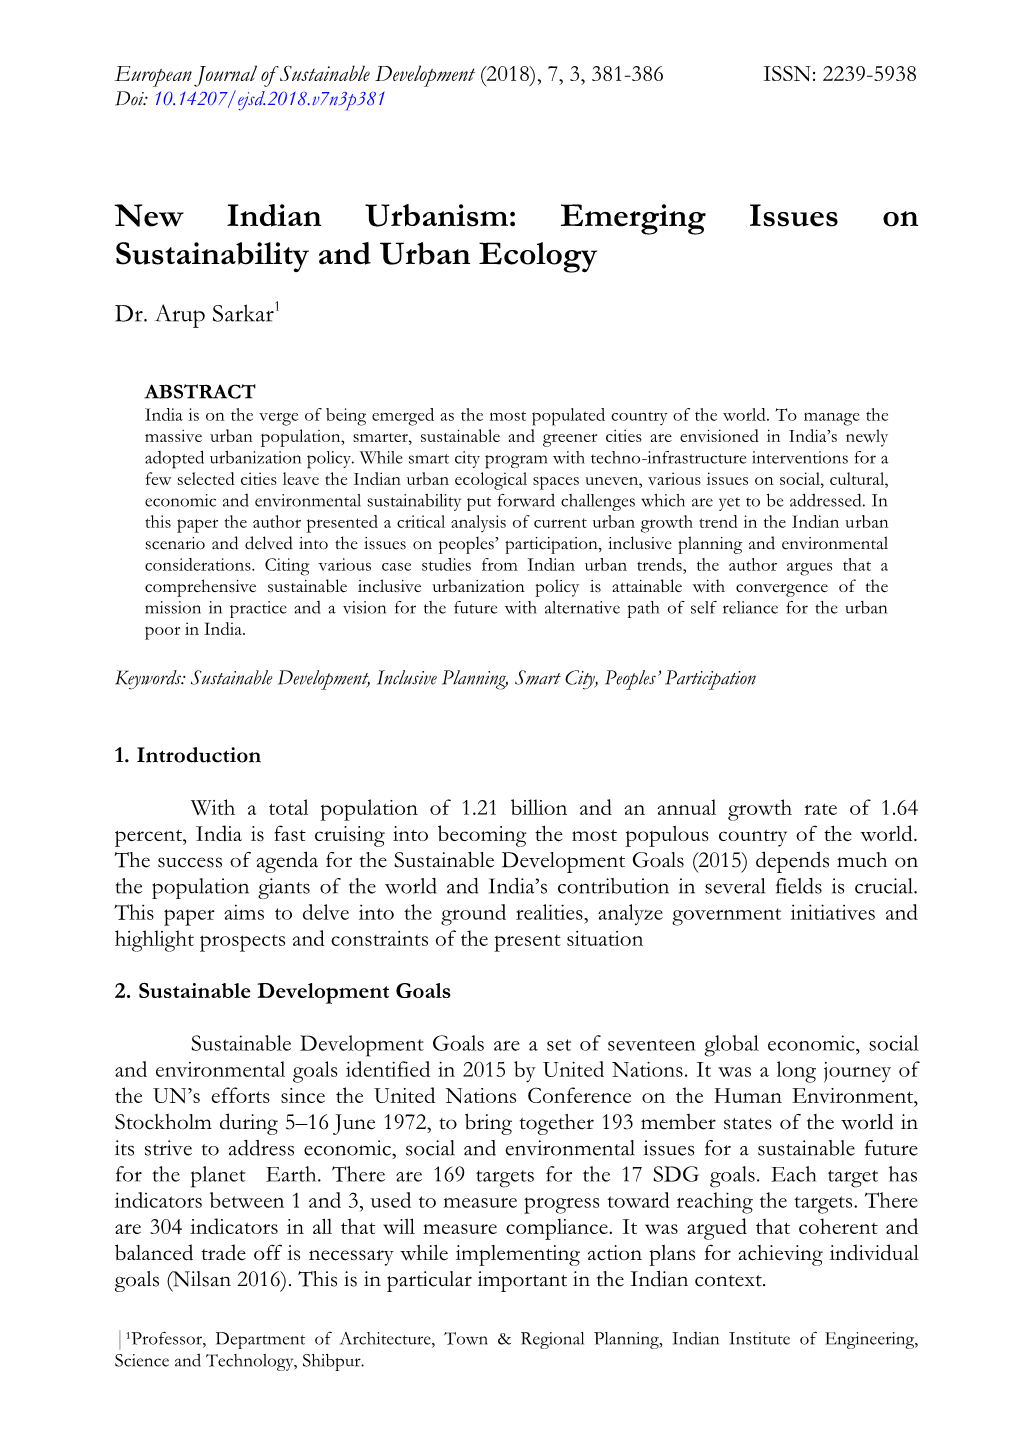 Emerging Issues on Sustainability and Urban Ecology